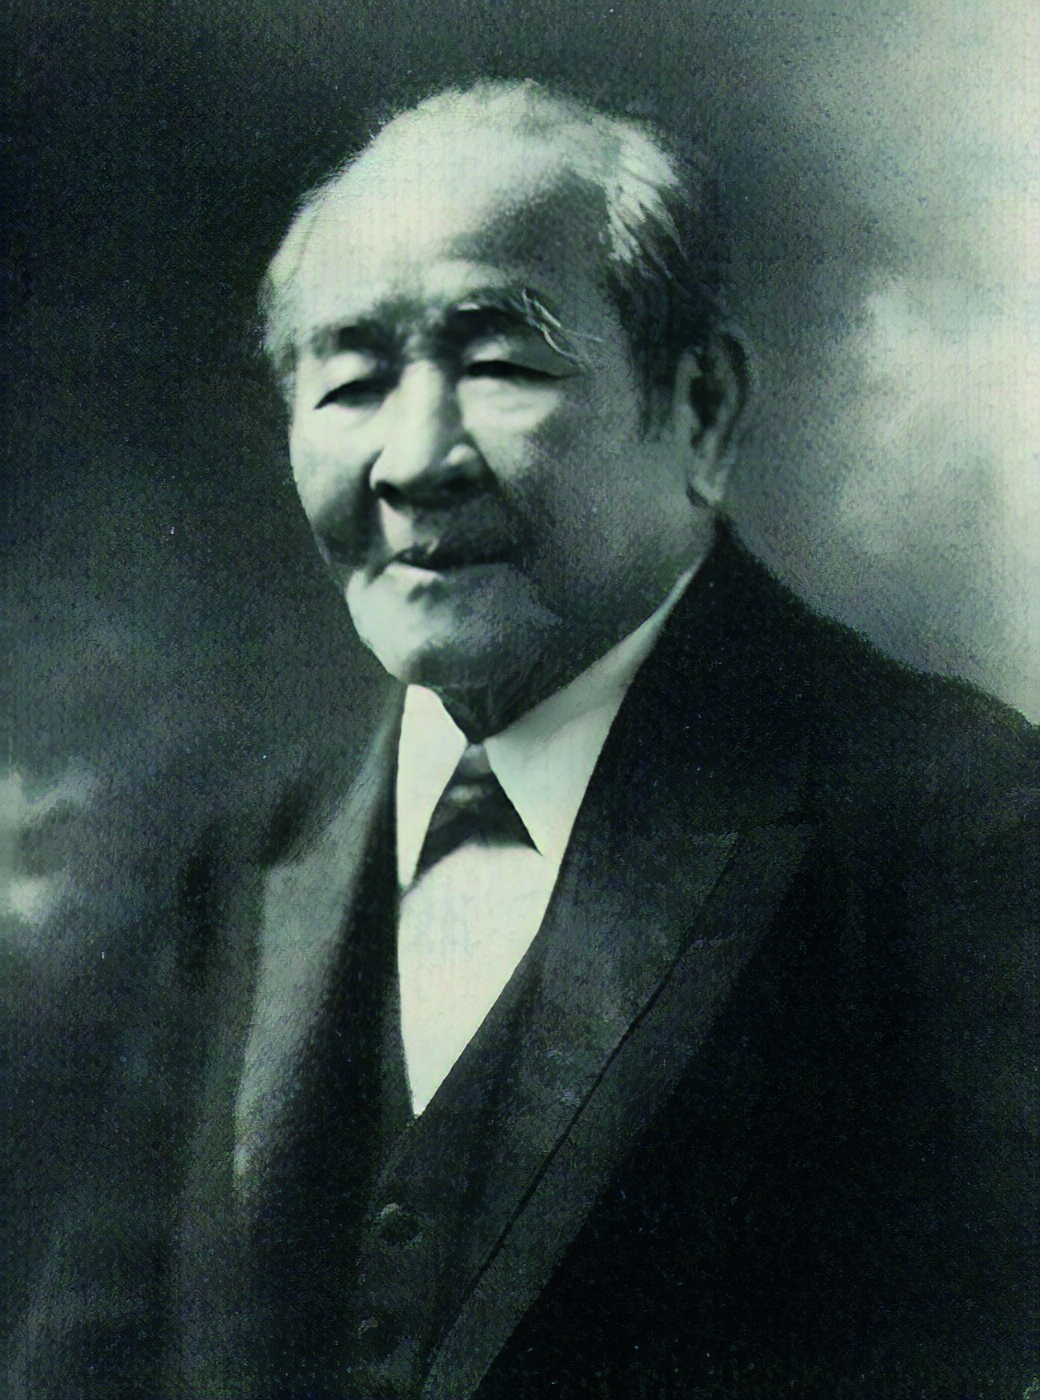 Shibusawa Eiichi, before 1913. Honoured as the father of Japan’s modern economy, Shibusawa studied and utilised Confucian principles to reform and grow Japan’s capitalist economy after the Meiji Restoration Period. Source: Wikipedia